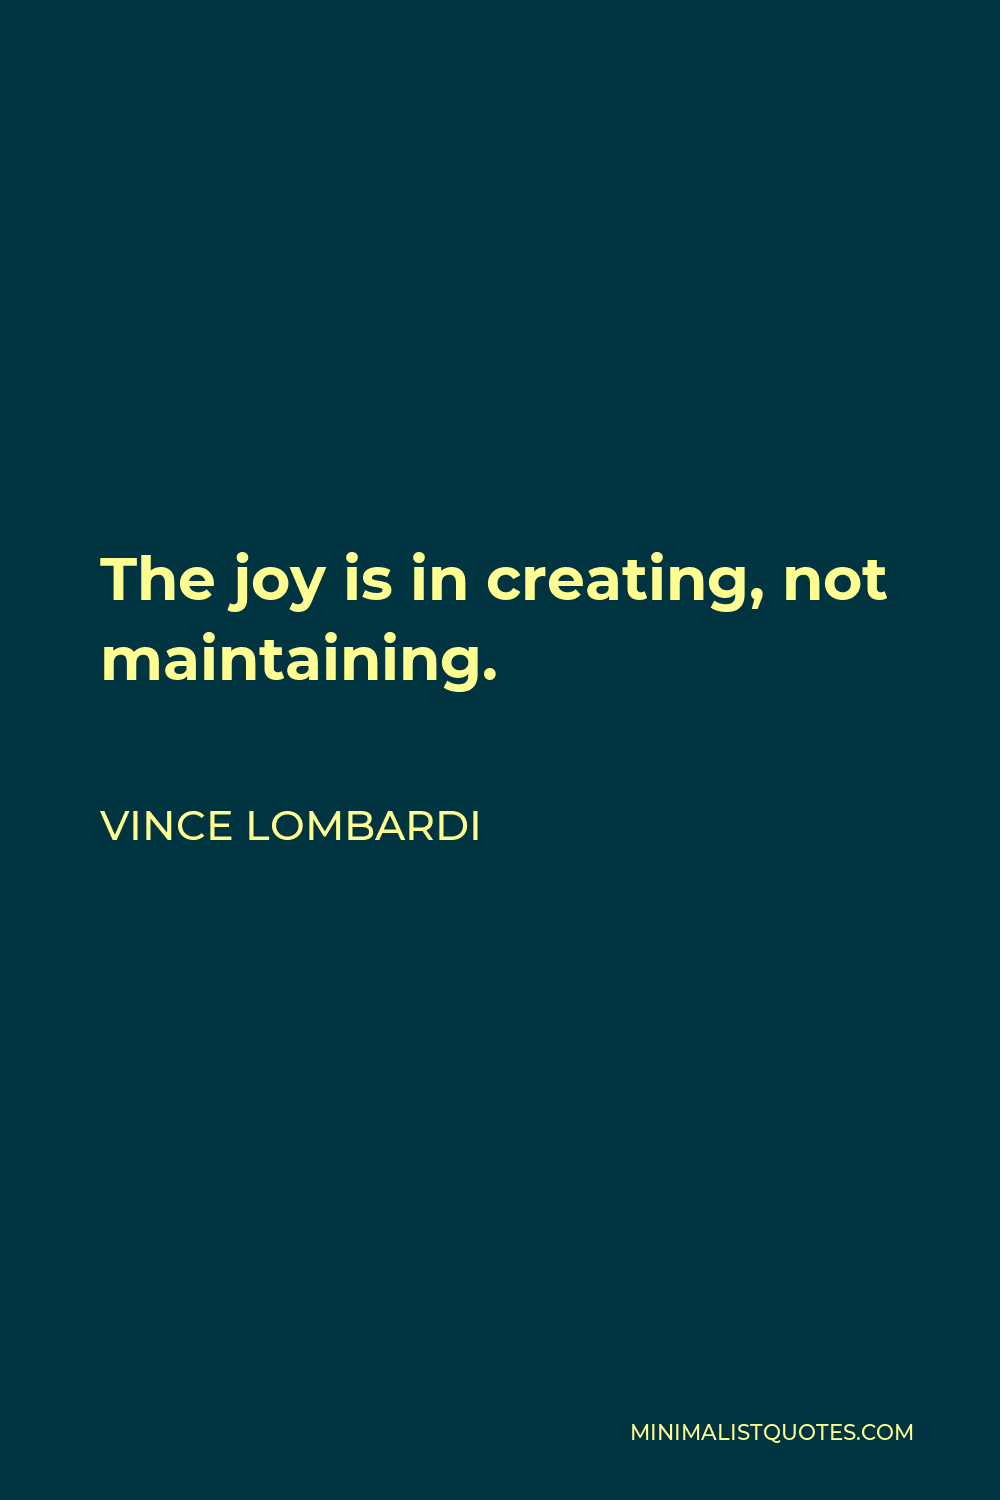 Vince Lombardi Quote - The joy is in creating, not maintaining.